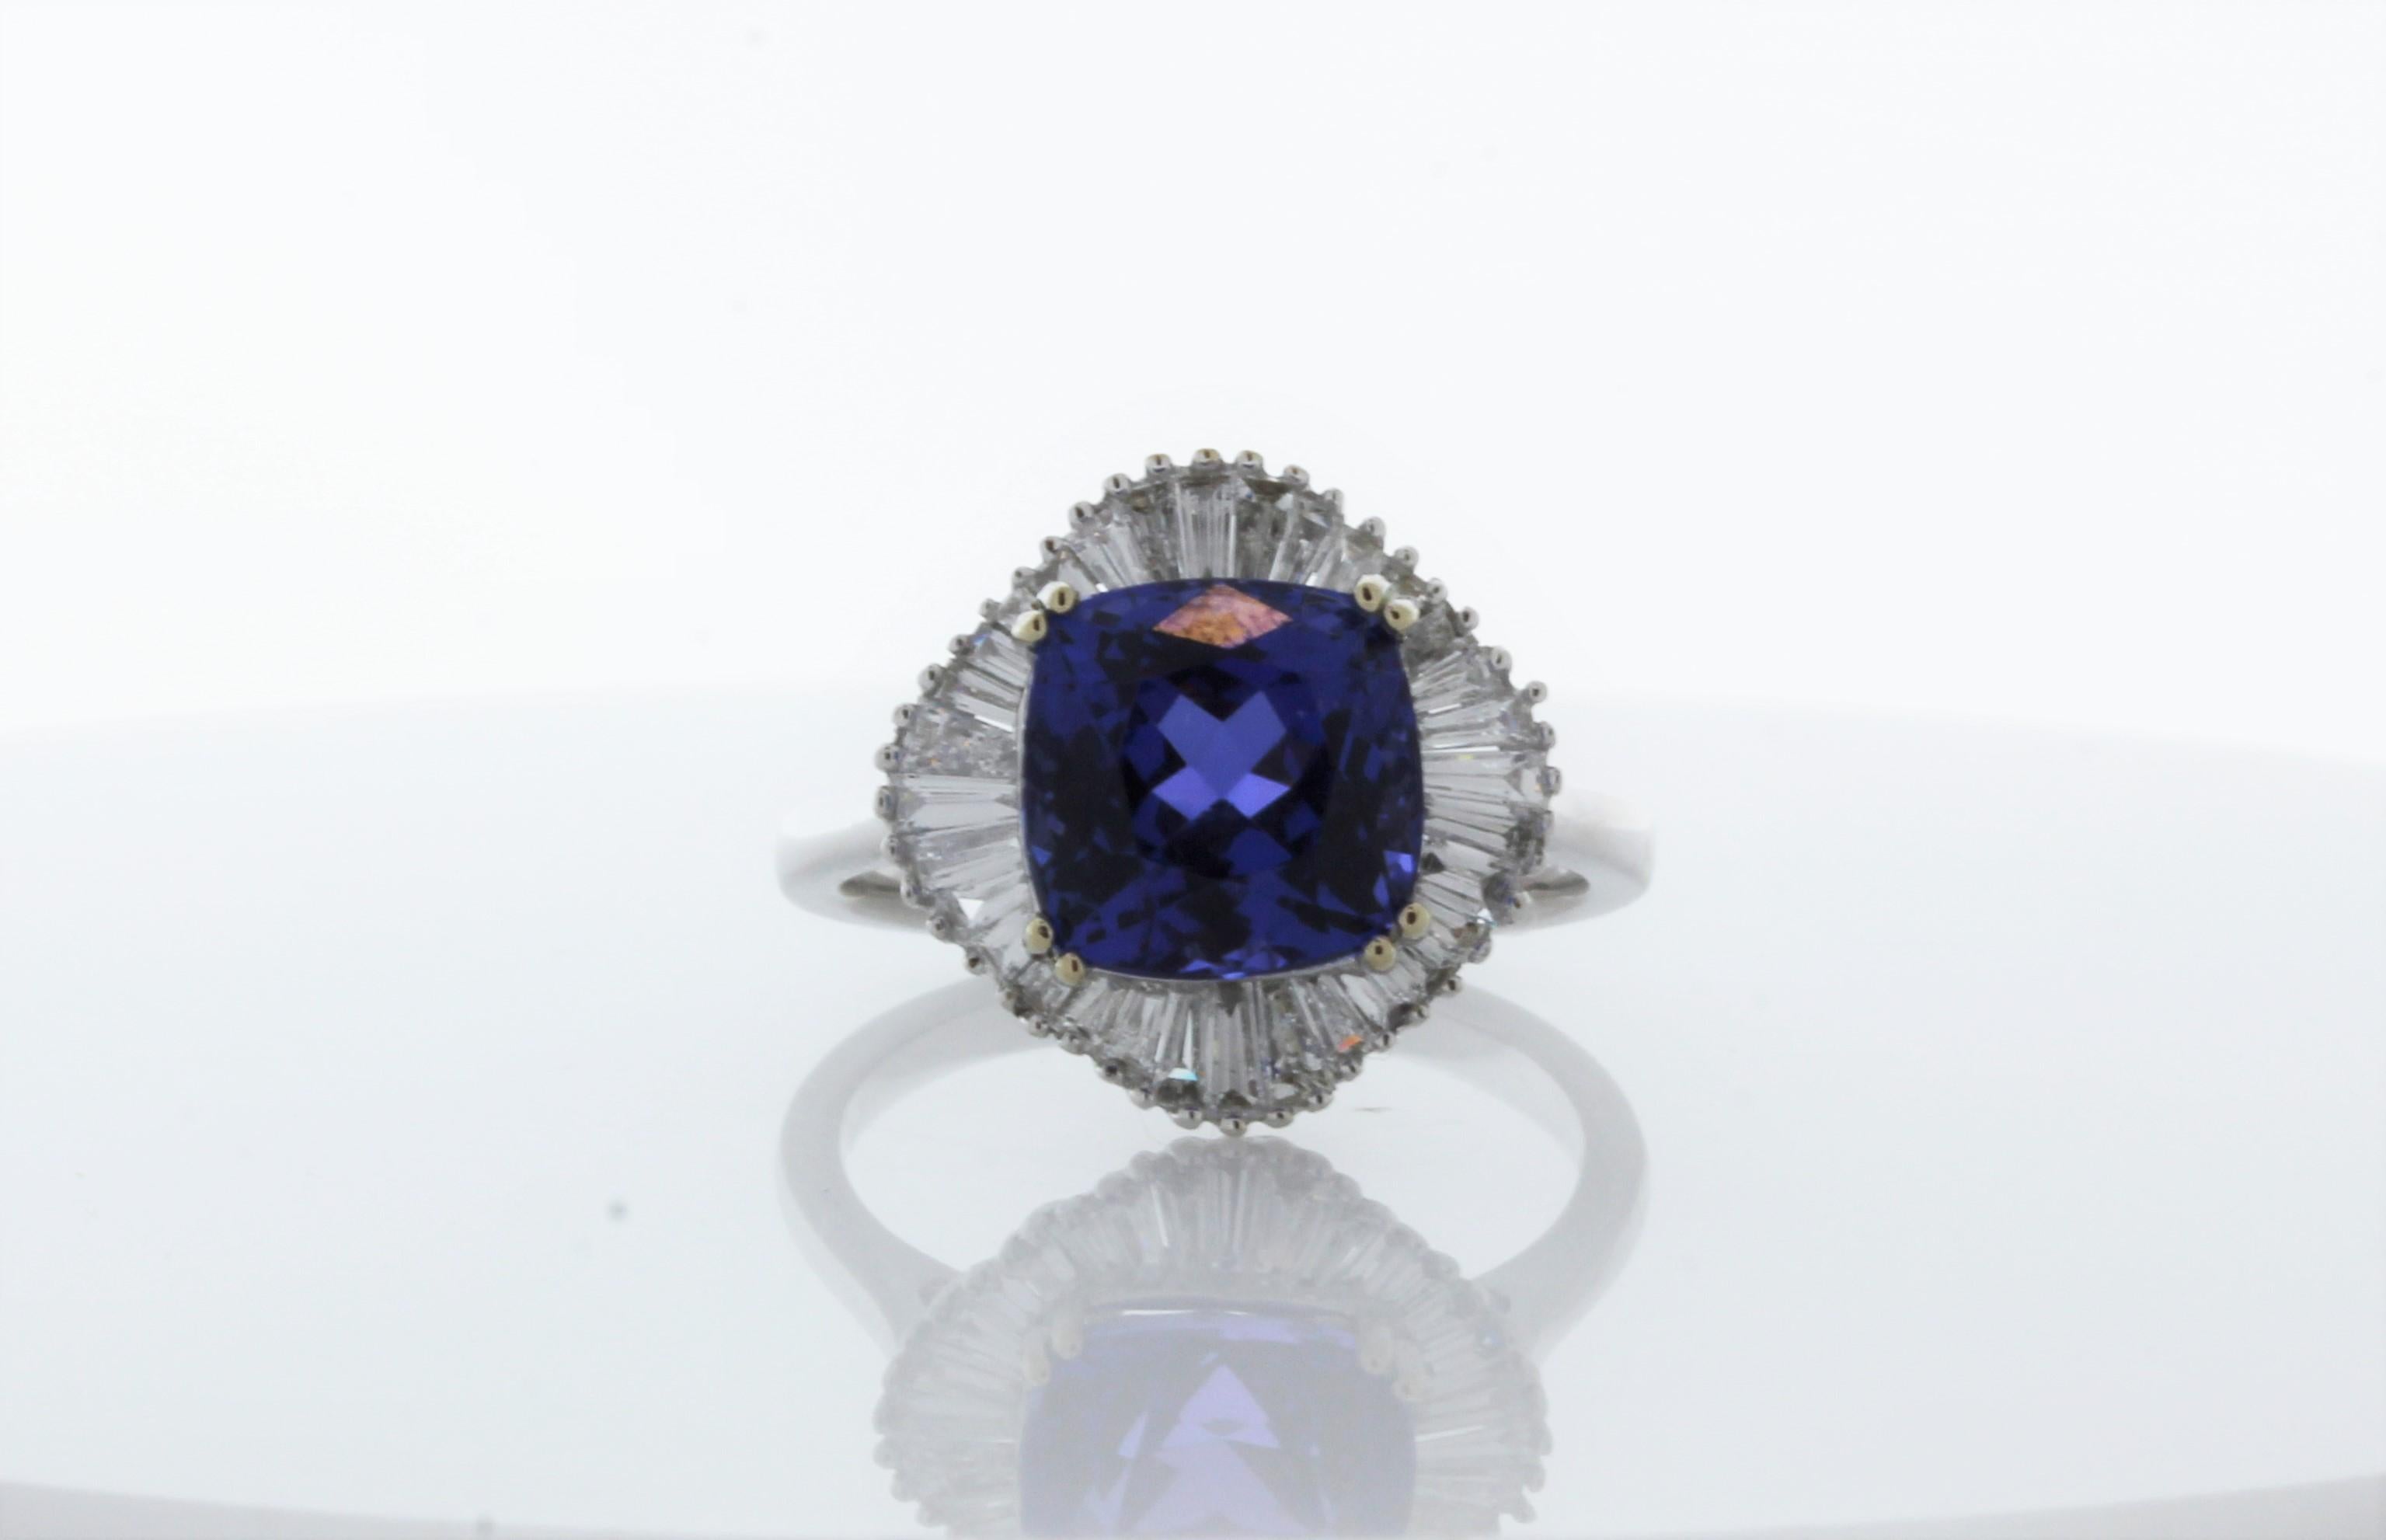 No one can resist being drawn in by the gorgeous 4.72carat oval tanzanite center. The color of this gem is vivid blue-violet, sourced from the foothills of Mt. Kilimanjaro in Tanzania. Its color is the most desired - resembling fine blue sapphire.